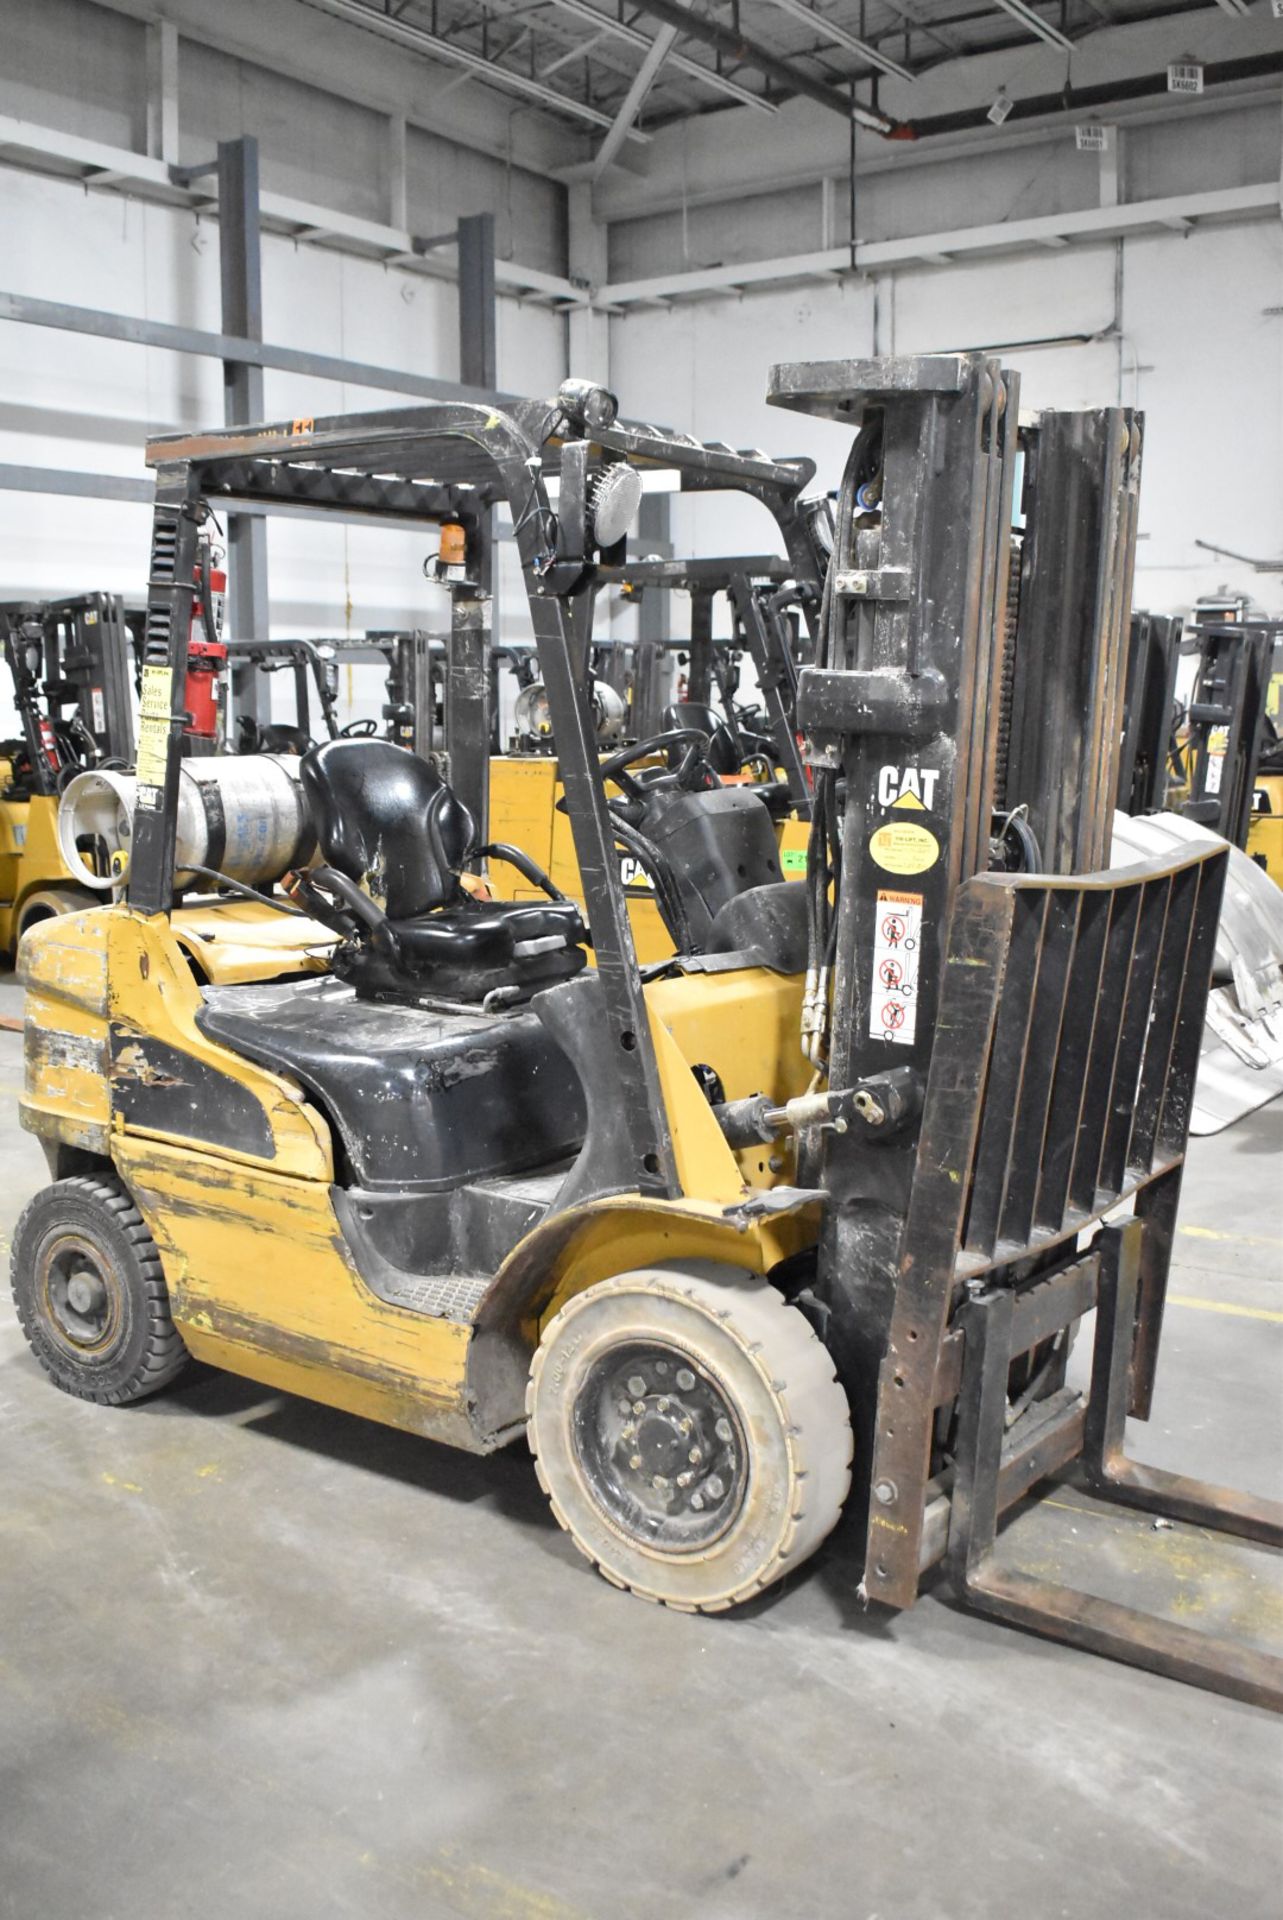 CATERPILLAR P5000-LP 4,500 LBS. CAPACITY LPG FORKLIFT WITH 188" MAX VERTICAL REACH, 3-STAGE HIGH - Image 3 of 7